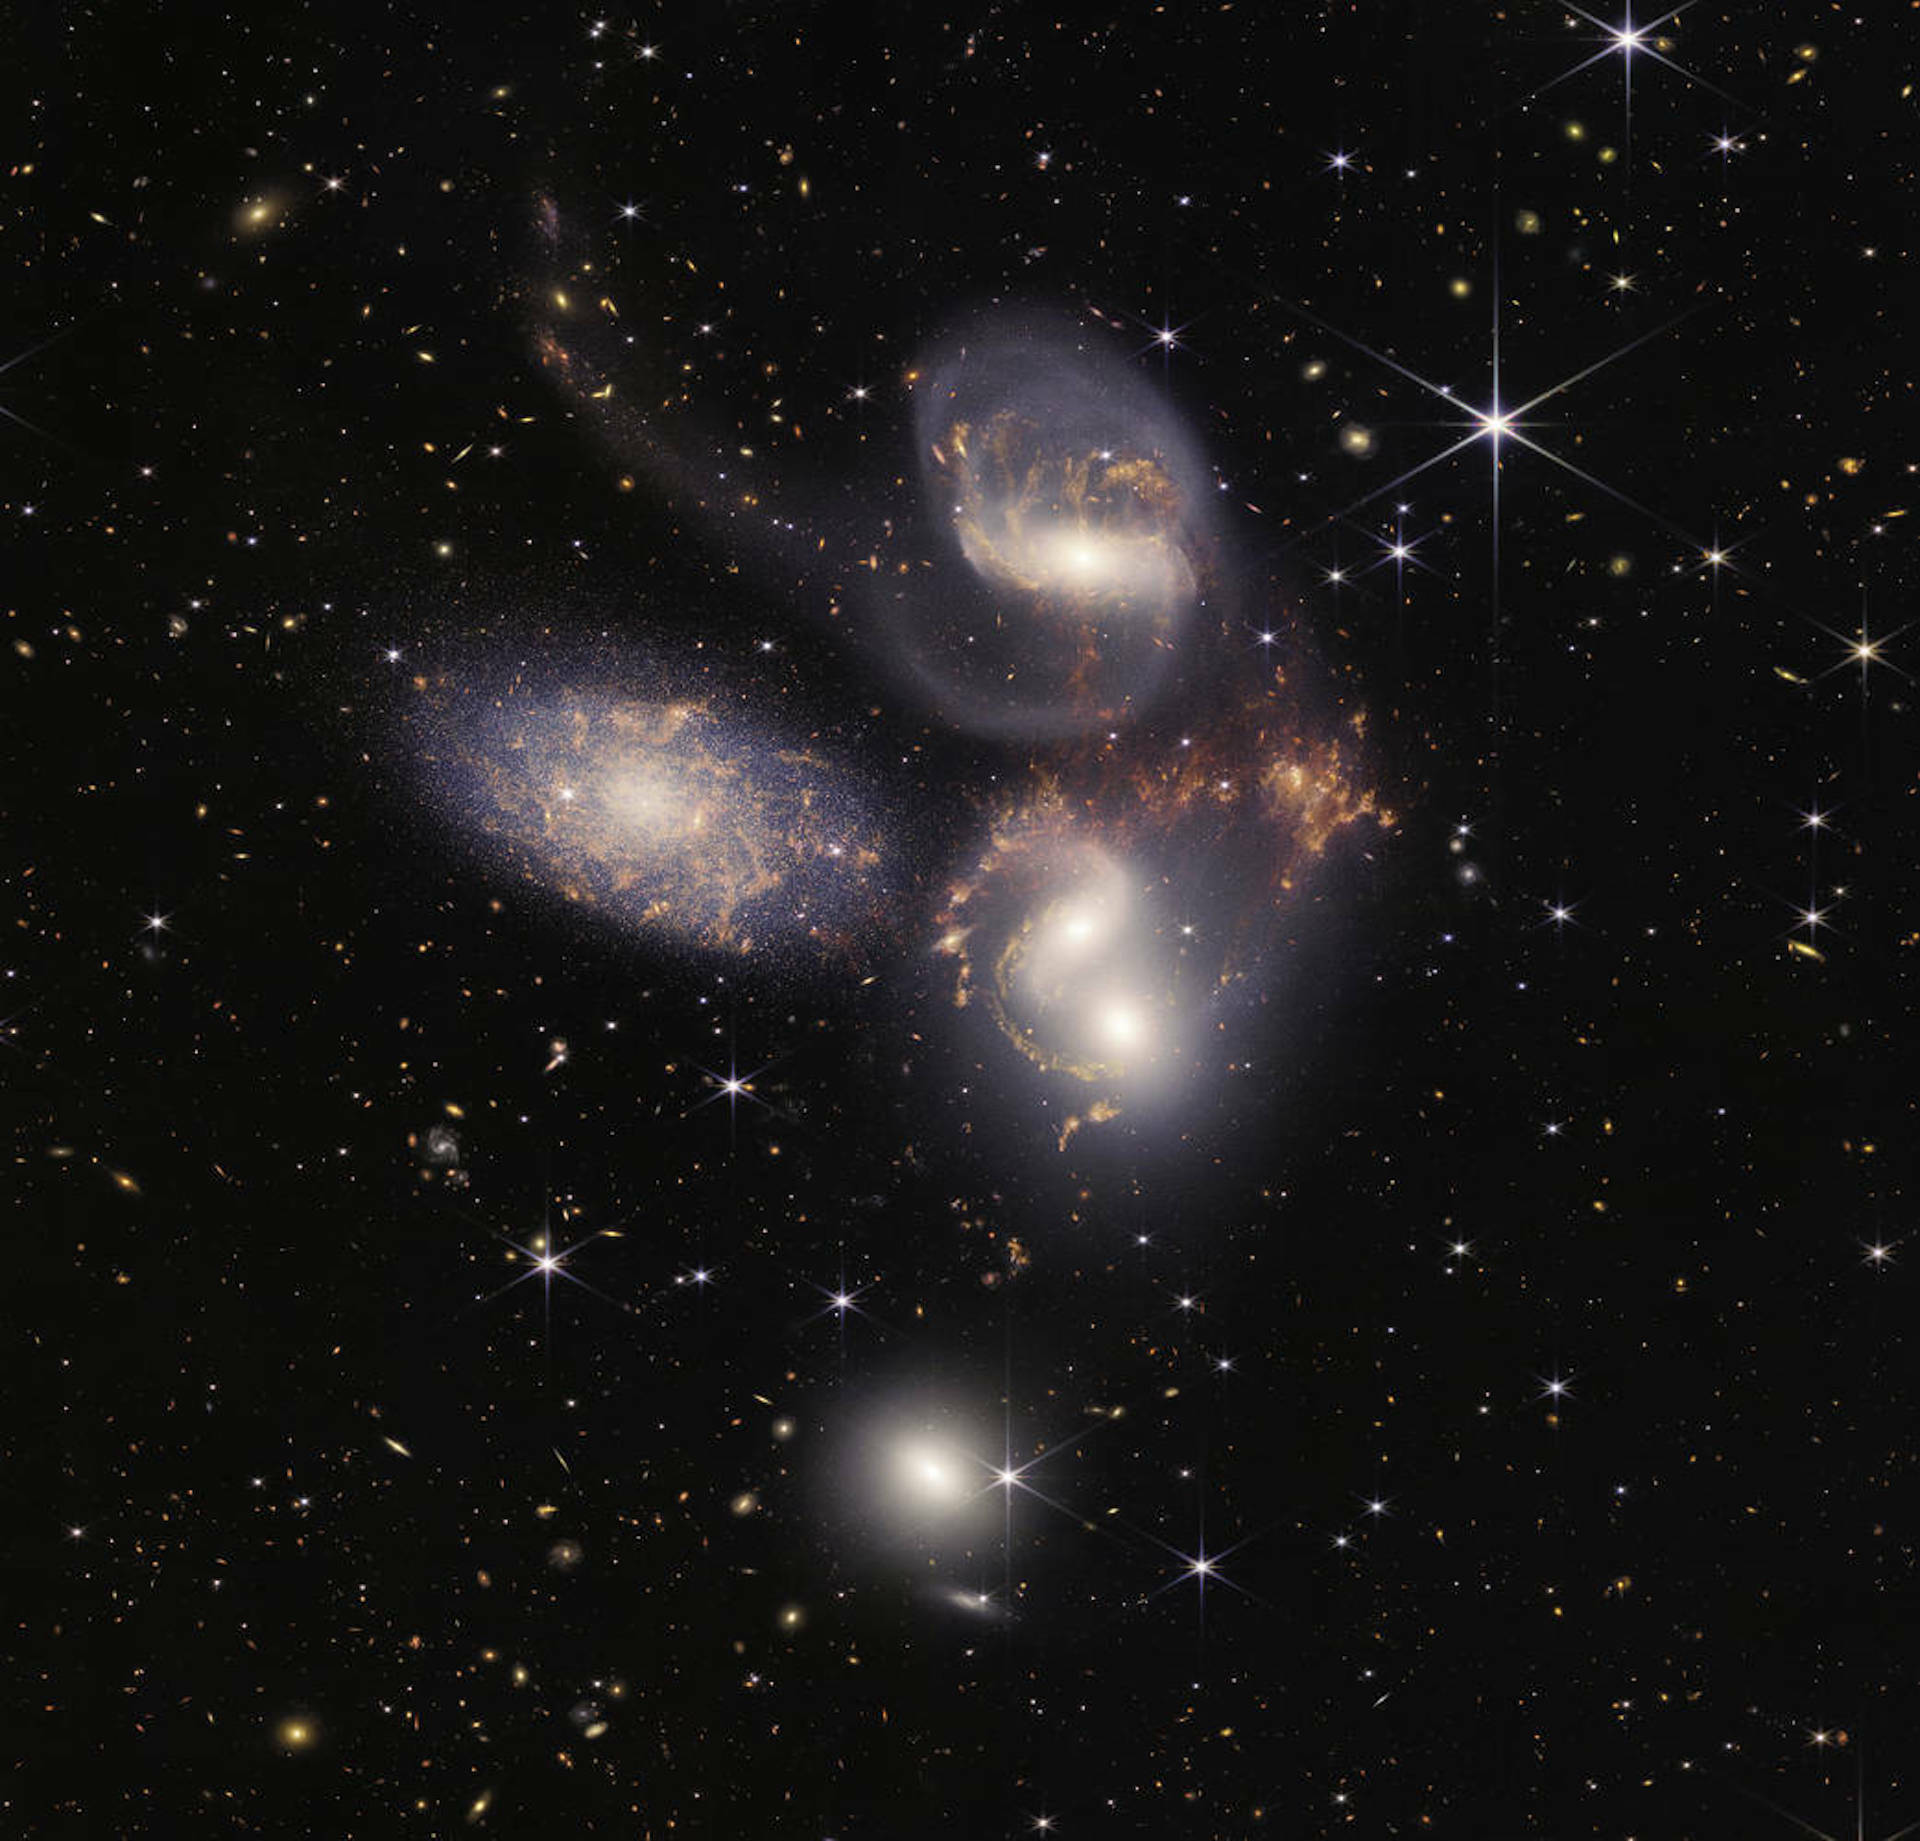 A group of galaxies imaged close together by the James Webb Telescope.